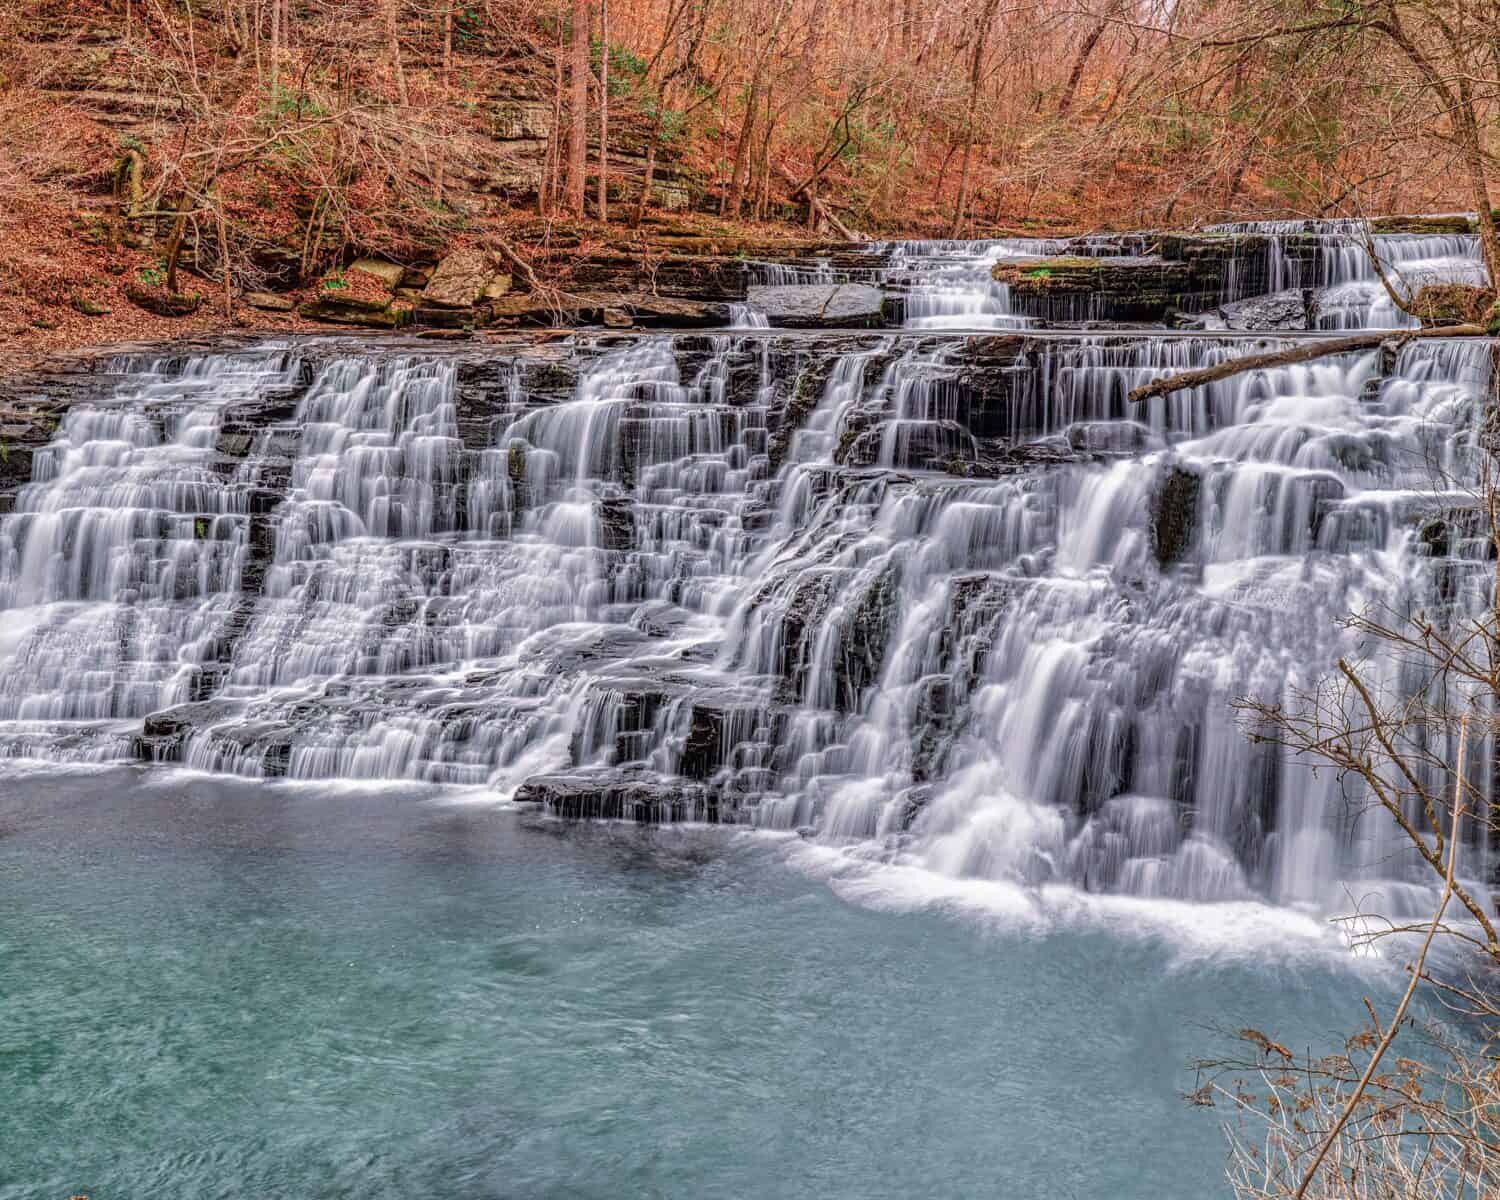 Waterfall at Rutledge Falls in Manchester Tennessee USA.